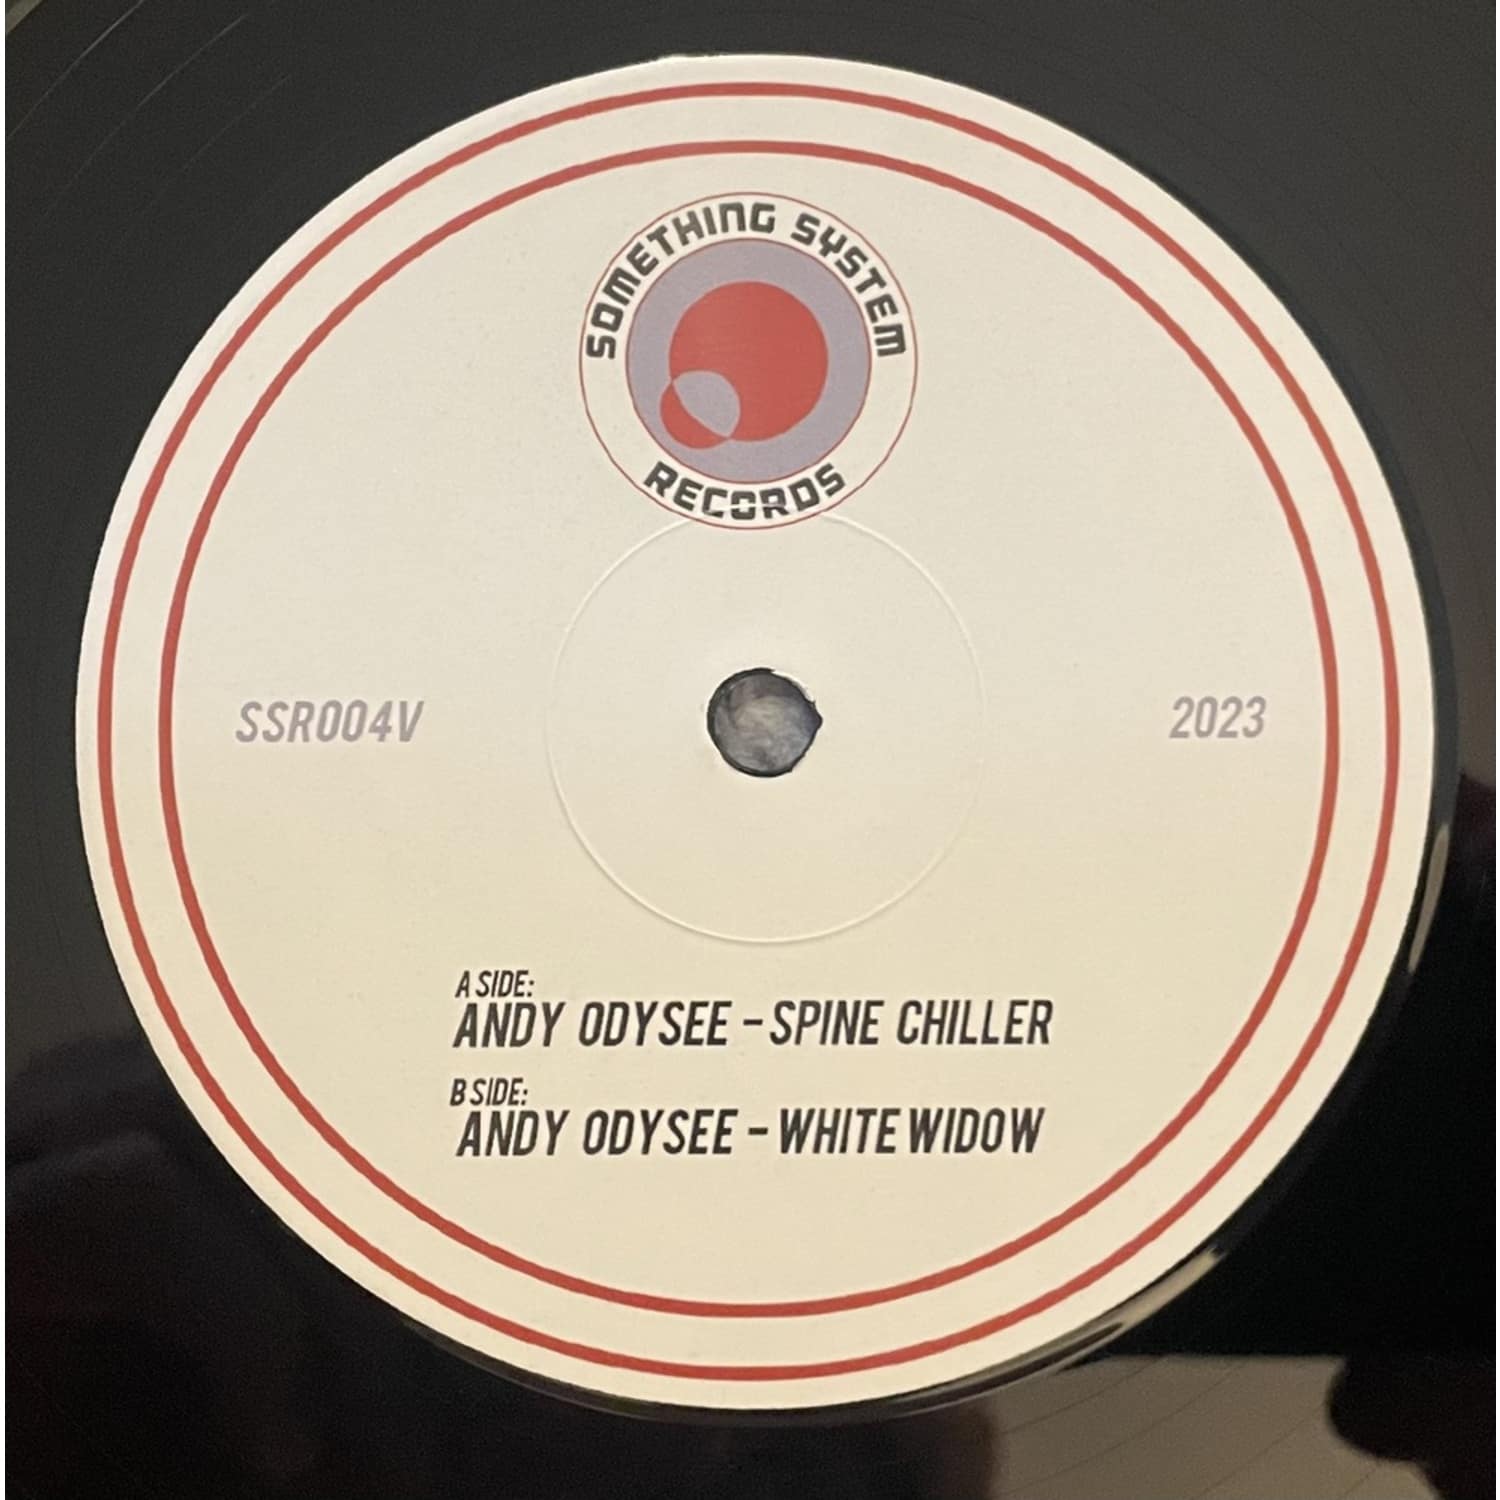 Andy Odysee - SPINE CHILLER / WHITE WIDOW